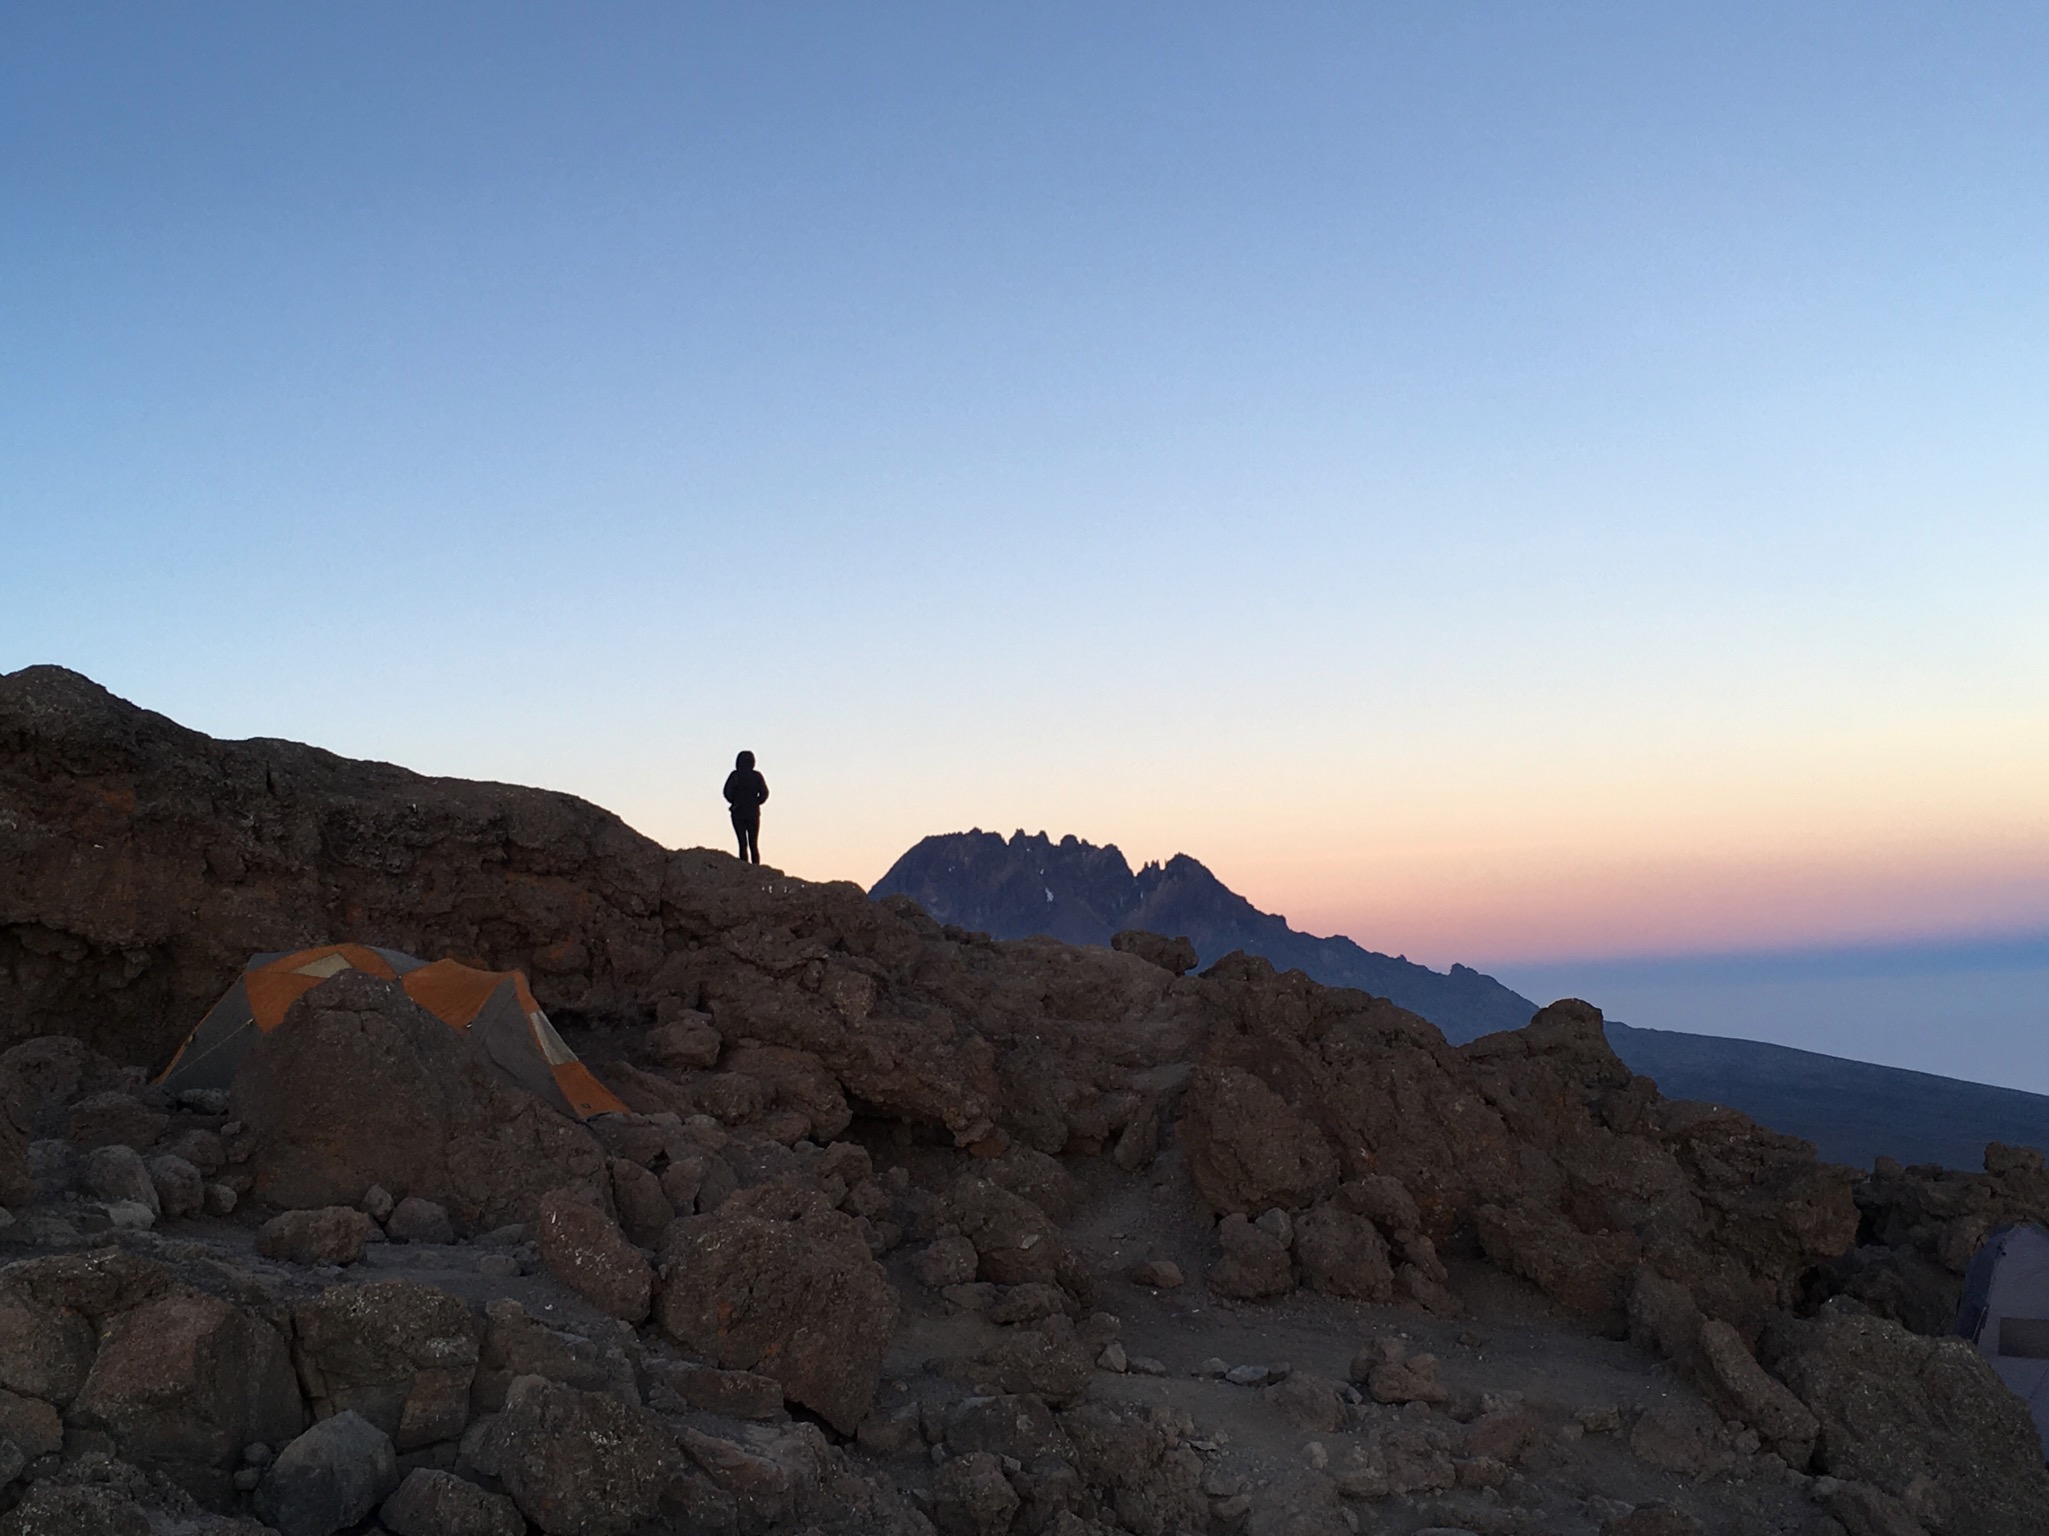 Photo of a person standing on a mountain ridge overlooking sunset. Photo by the author.